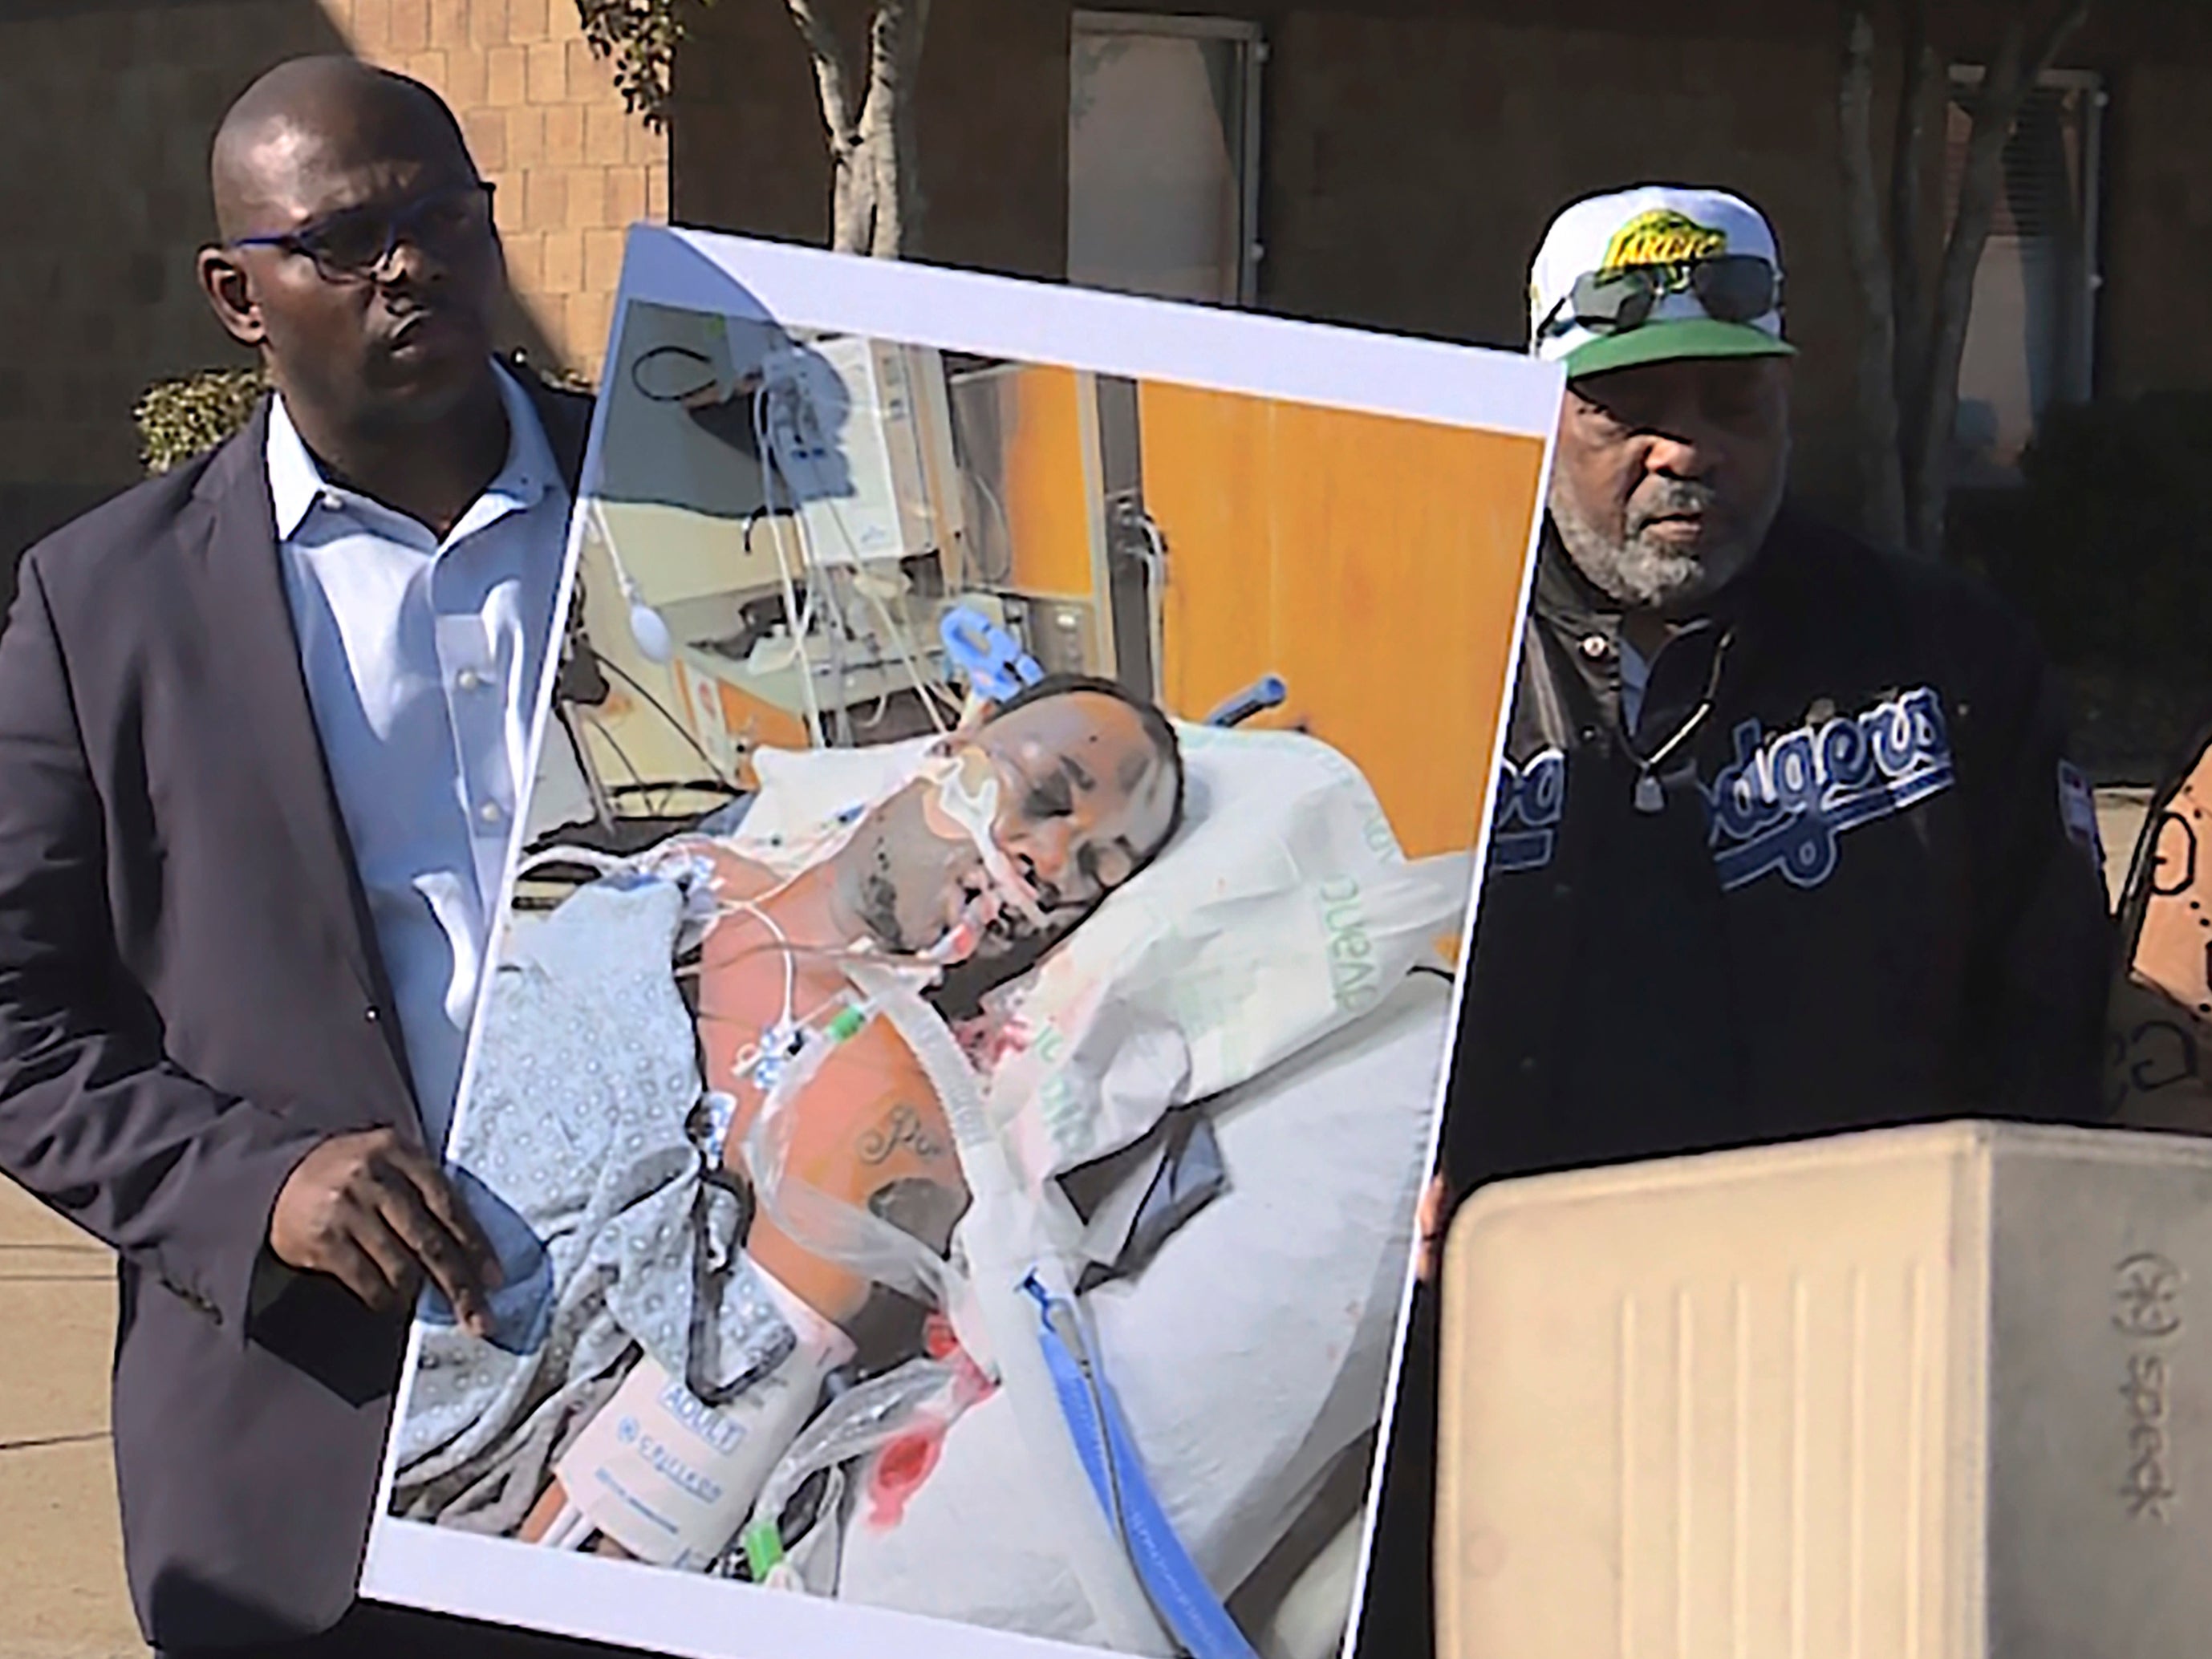 Tyre Nichols' stepfather Rodney Wells, centre, stands next to a photo of Nichols in the hospital after his arrest, during a protest in Memphis, Tennessee